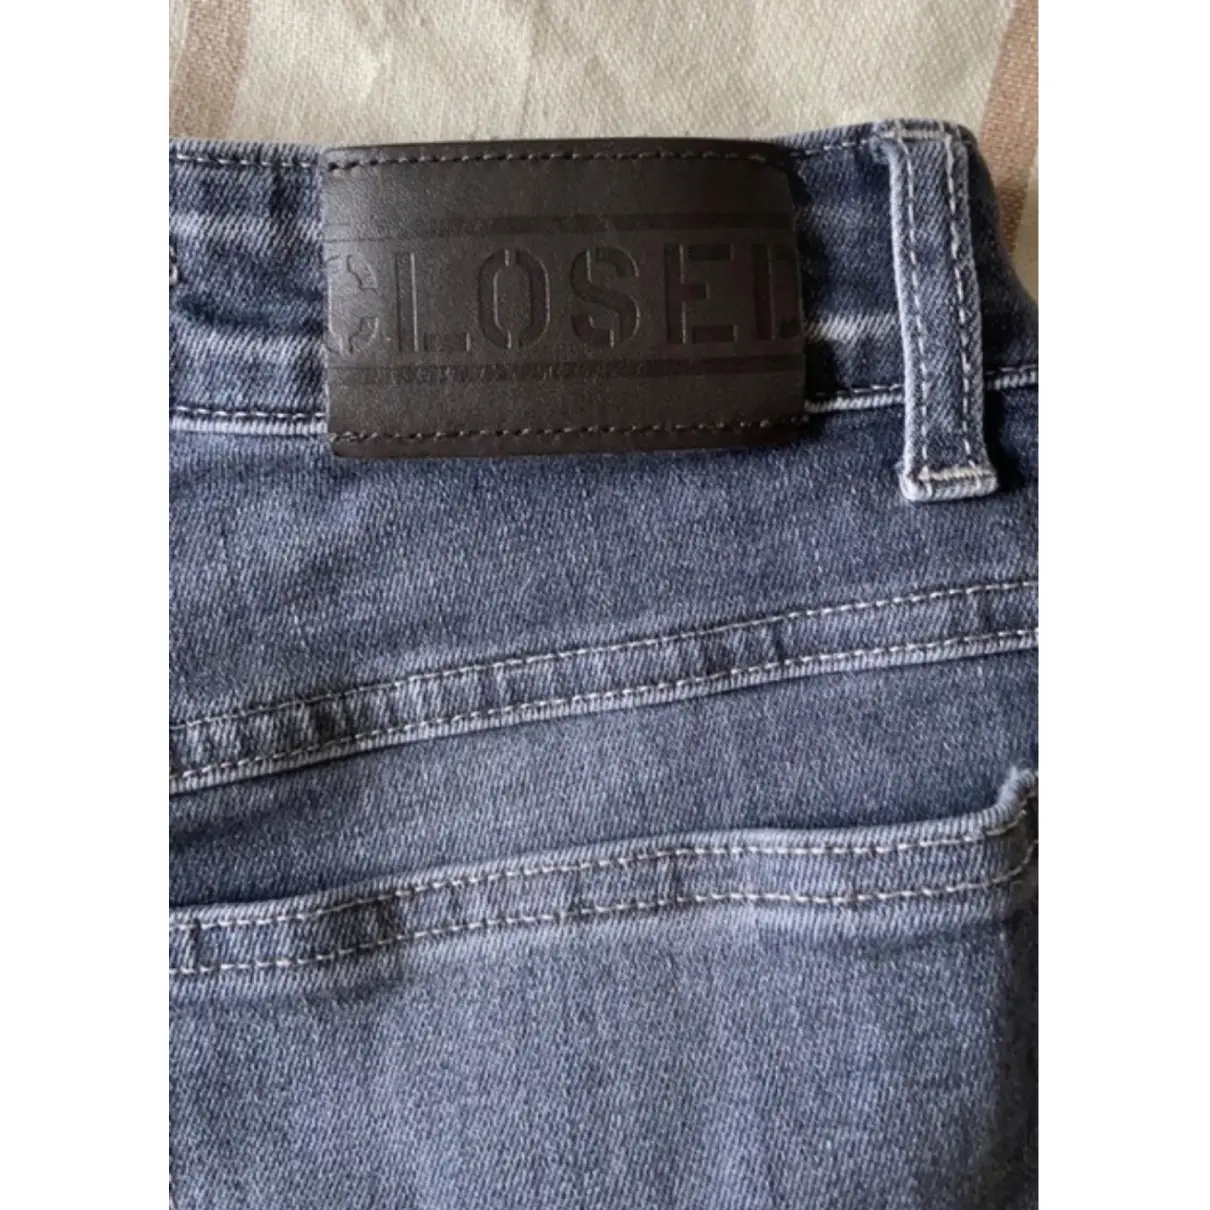 Jeans Closed